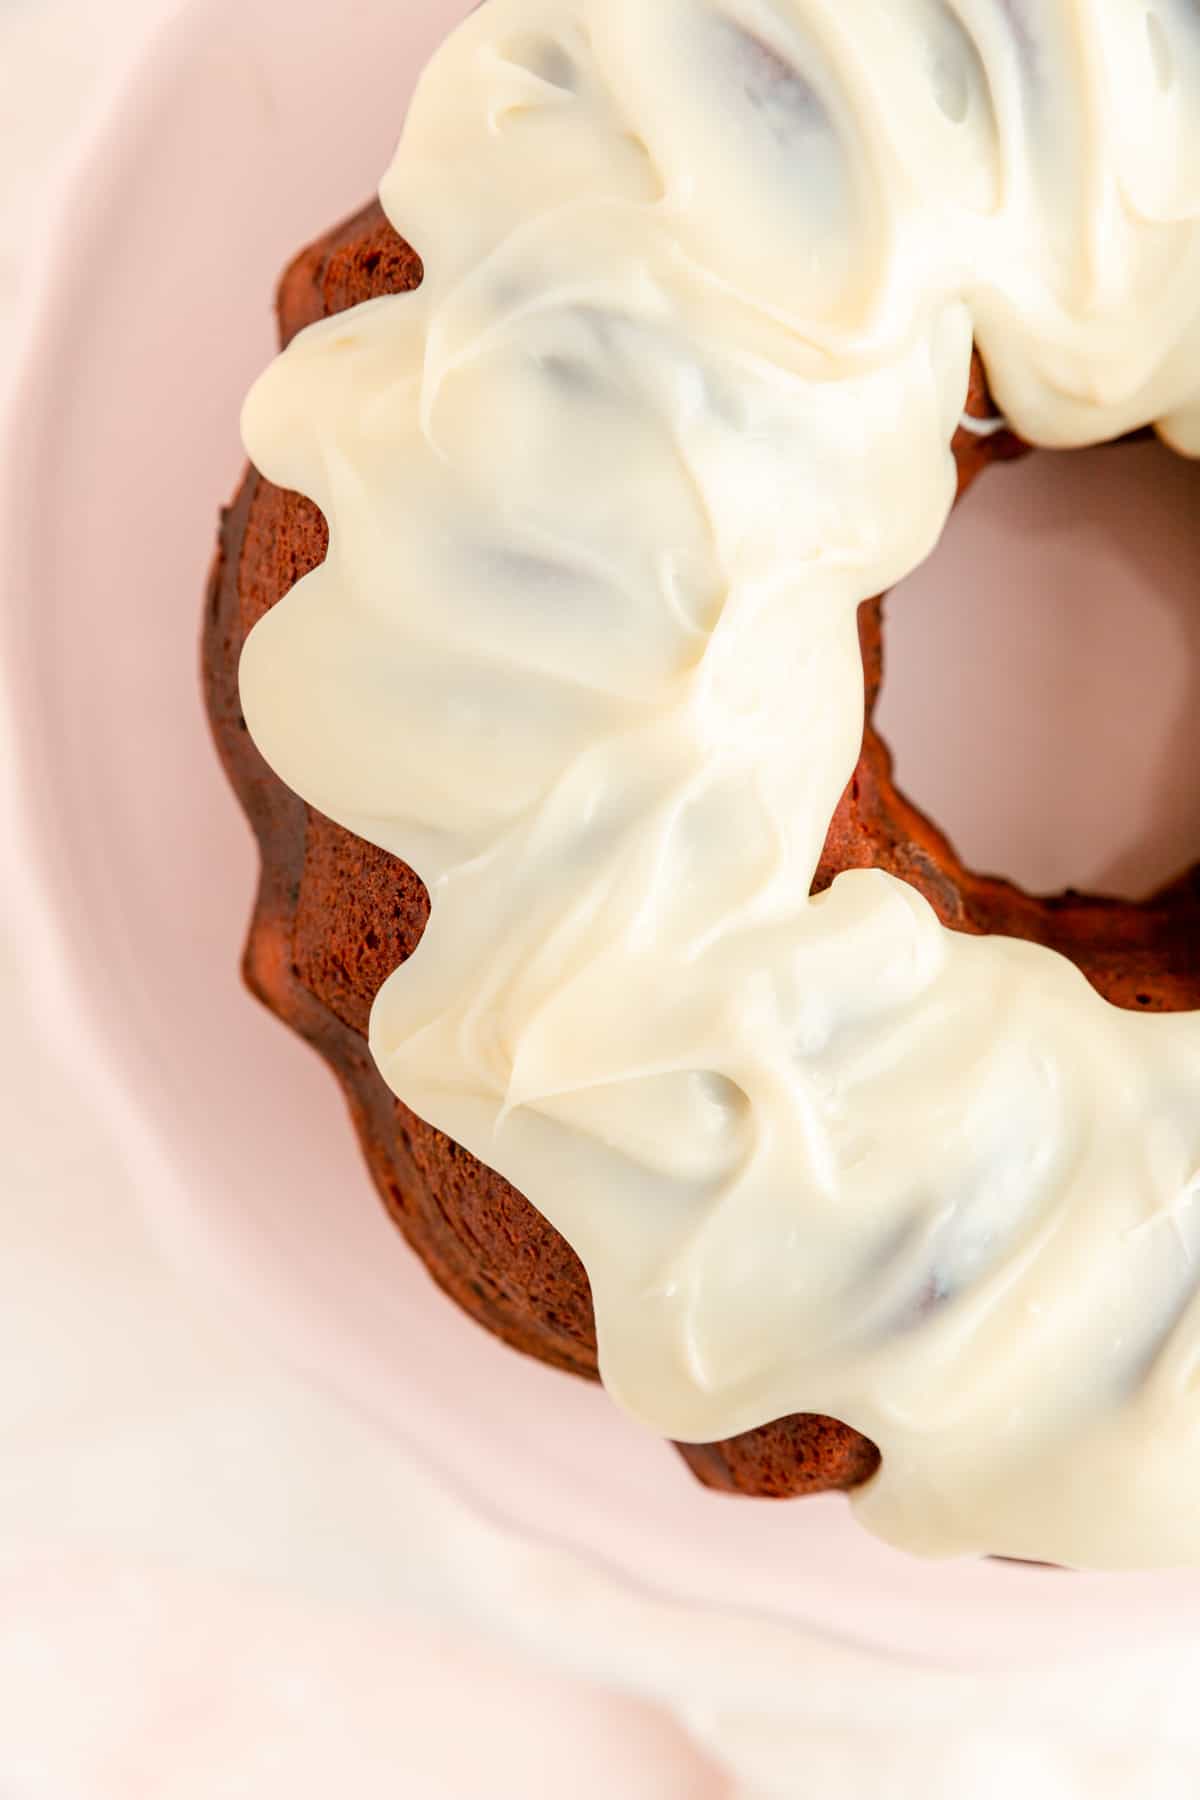 White chocolate sauce spread on a raspberry Bundt cake and pink cake plate.